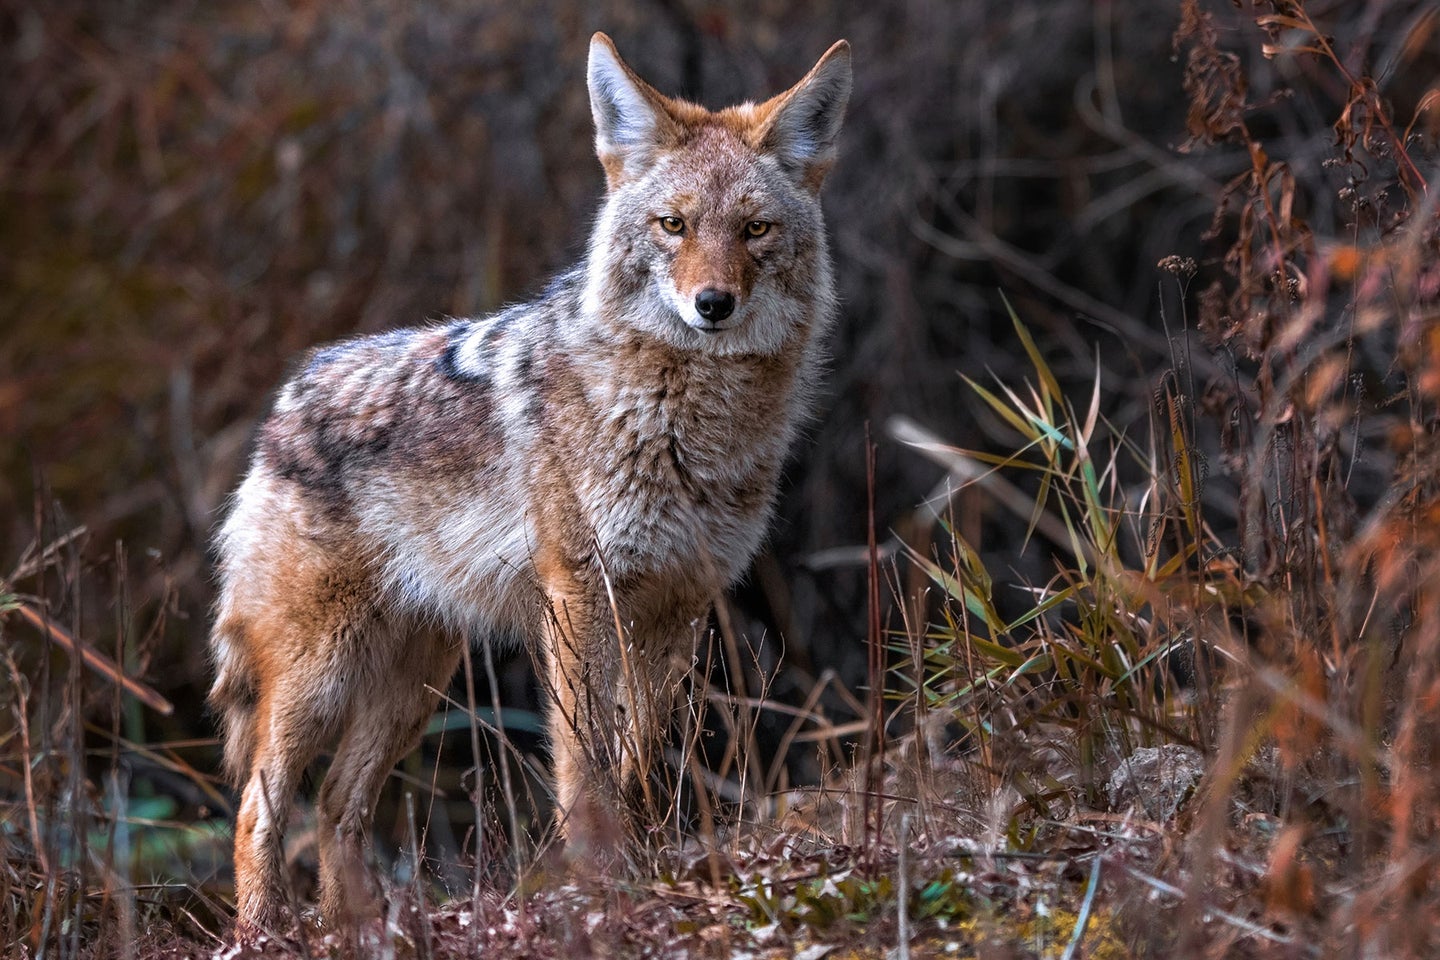 There is no closed season and no bag limit on coyotes in the state of Pennsylvania. 